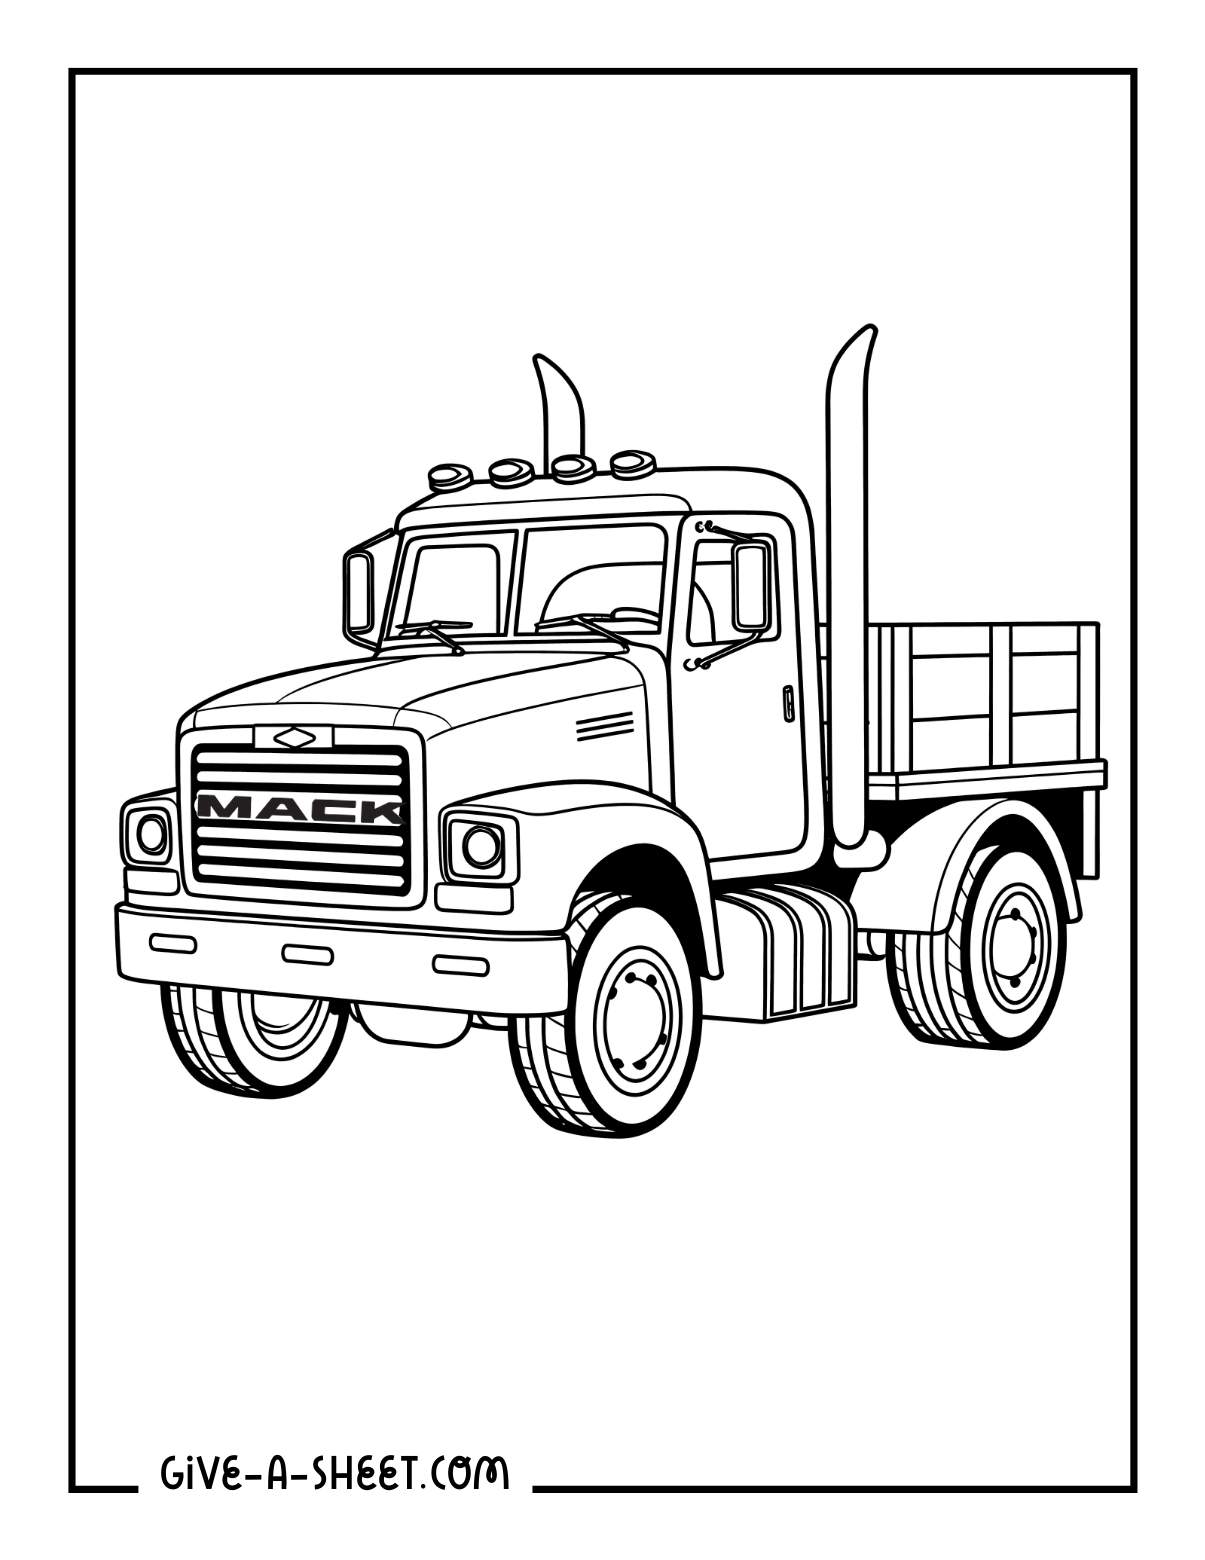 Mack truck coloring page for kids.